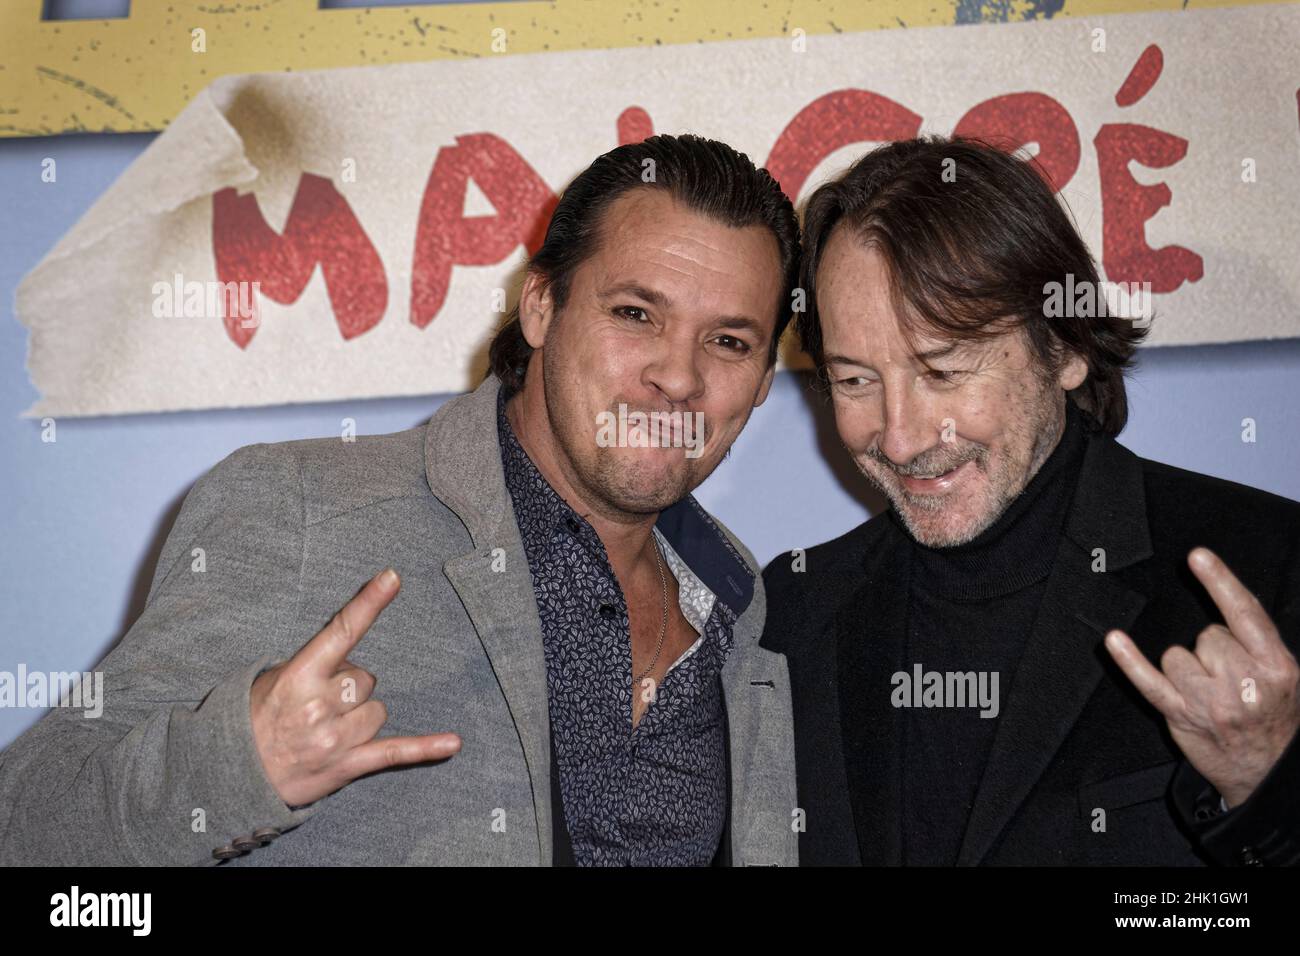 Paris, France. 31st Jan, 2022. Paco Boisson and Jean-Hugues Anglade attend the SUPER-HEROS MALGRE LUI premiere by Philippe Lacheau at Le Grand Rex. Stock Photo